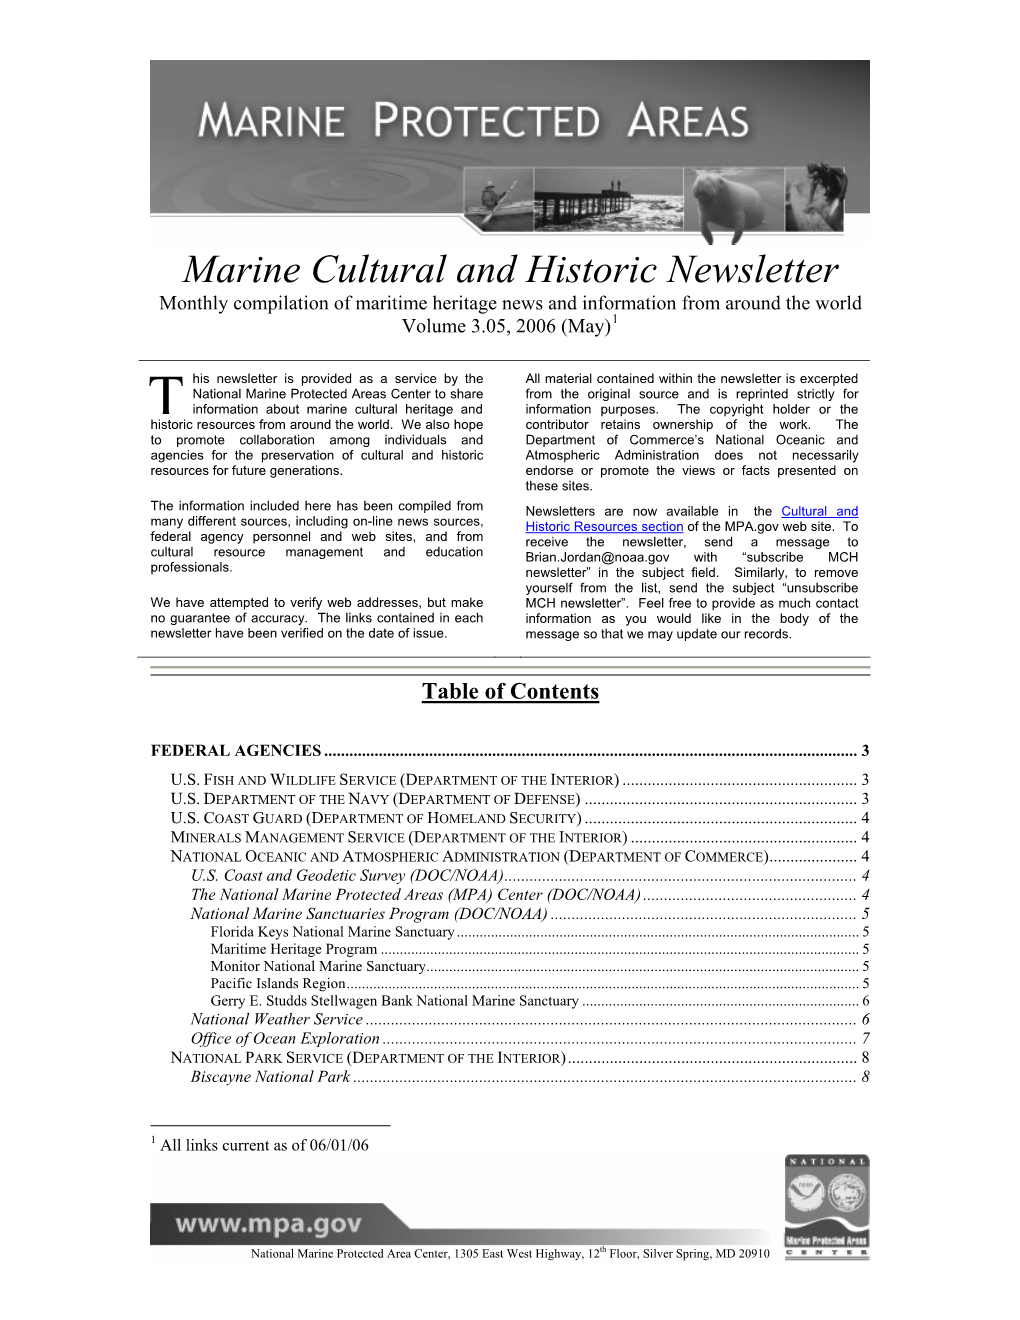 Marine Cultural and Historic Newsletter Vol 3(5)